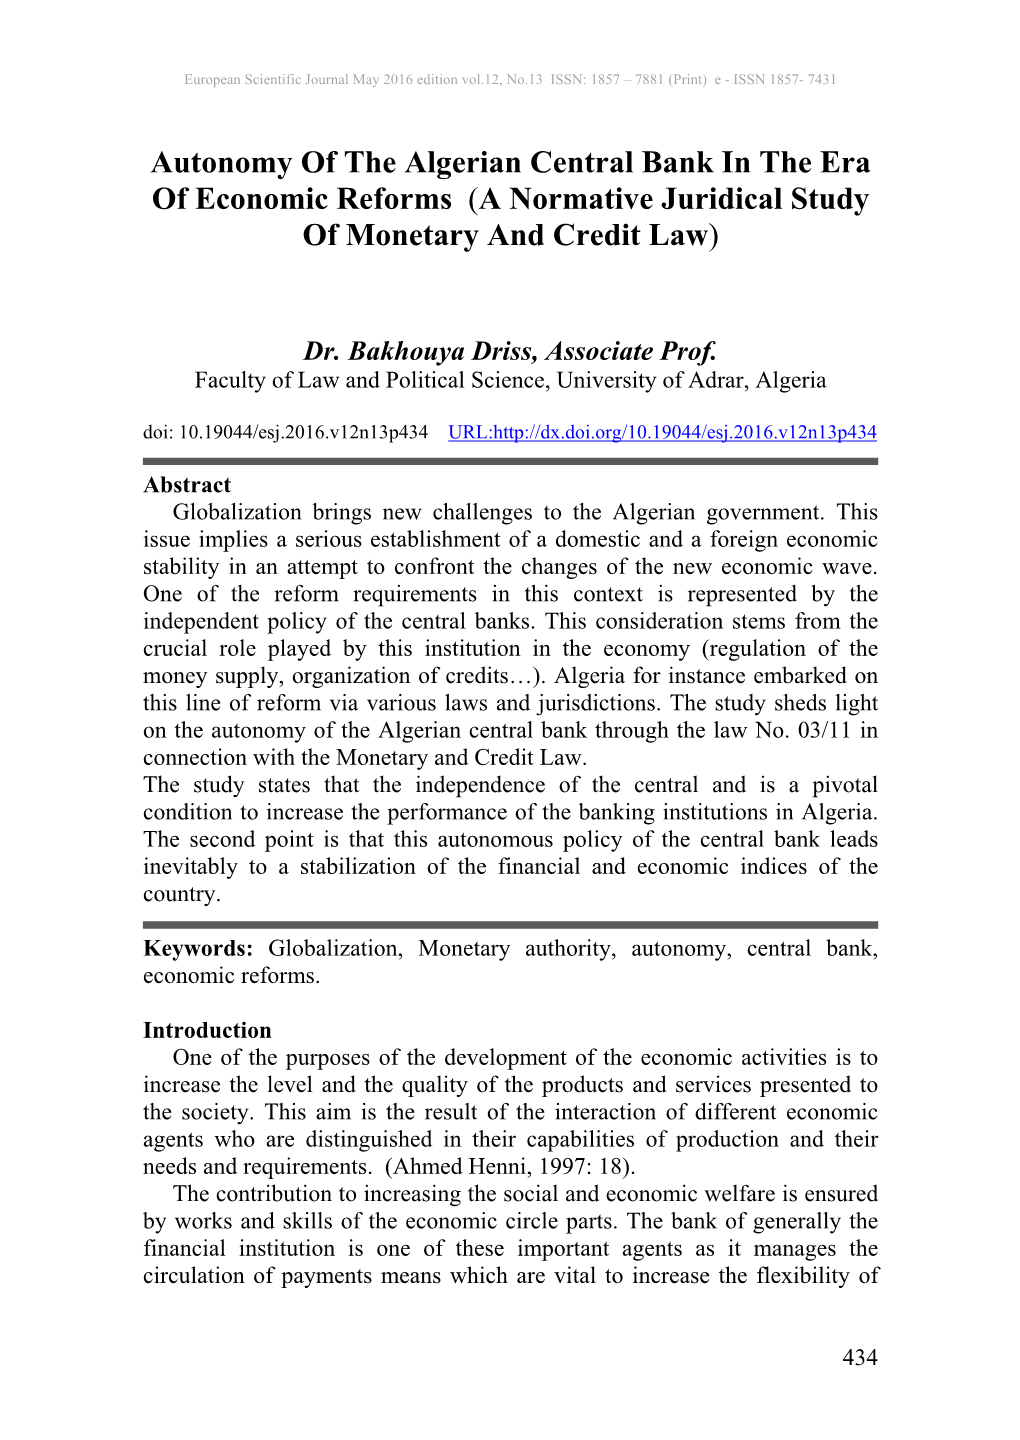 Autonomy of the Algerian Central Bank in the Era of Economic Reforms (A Normative Juridical Study of Monetary and Credit Law)